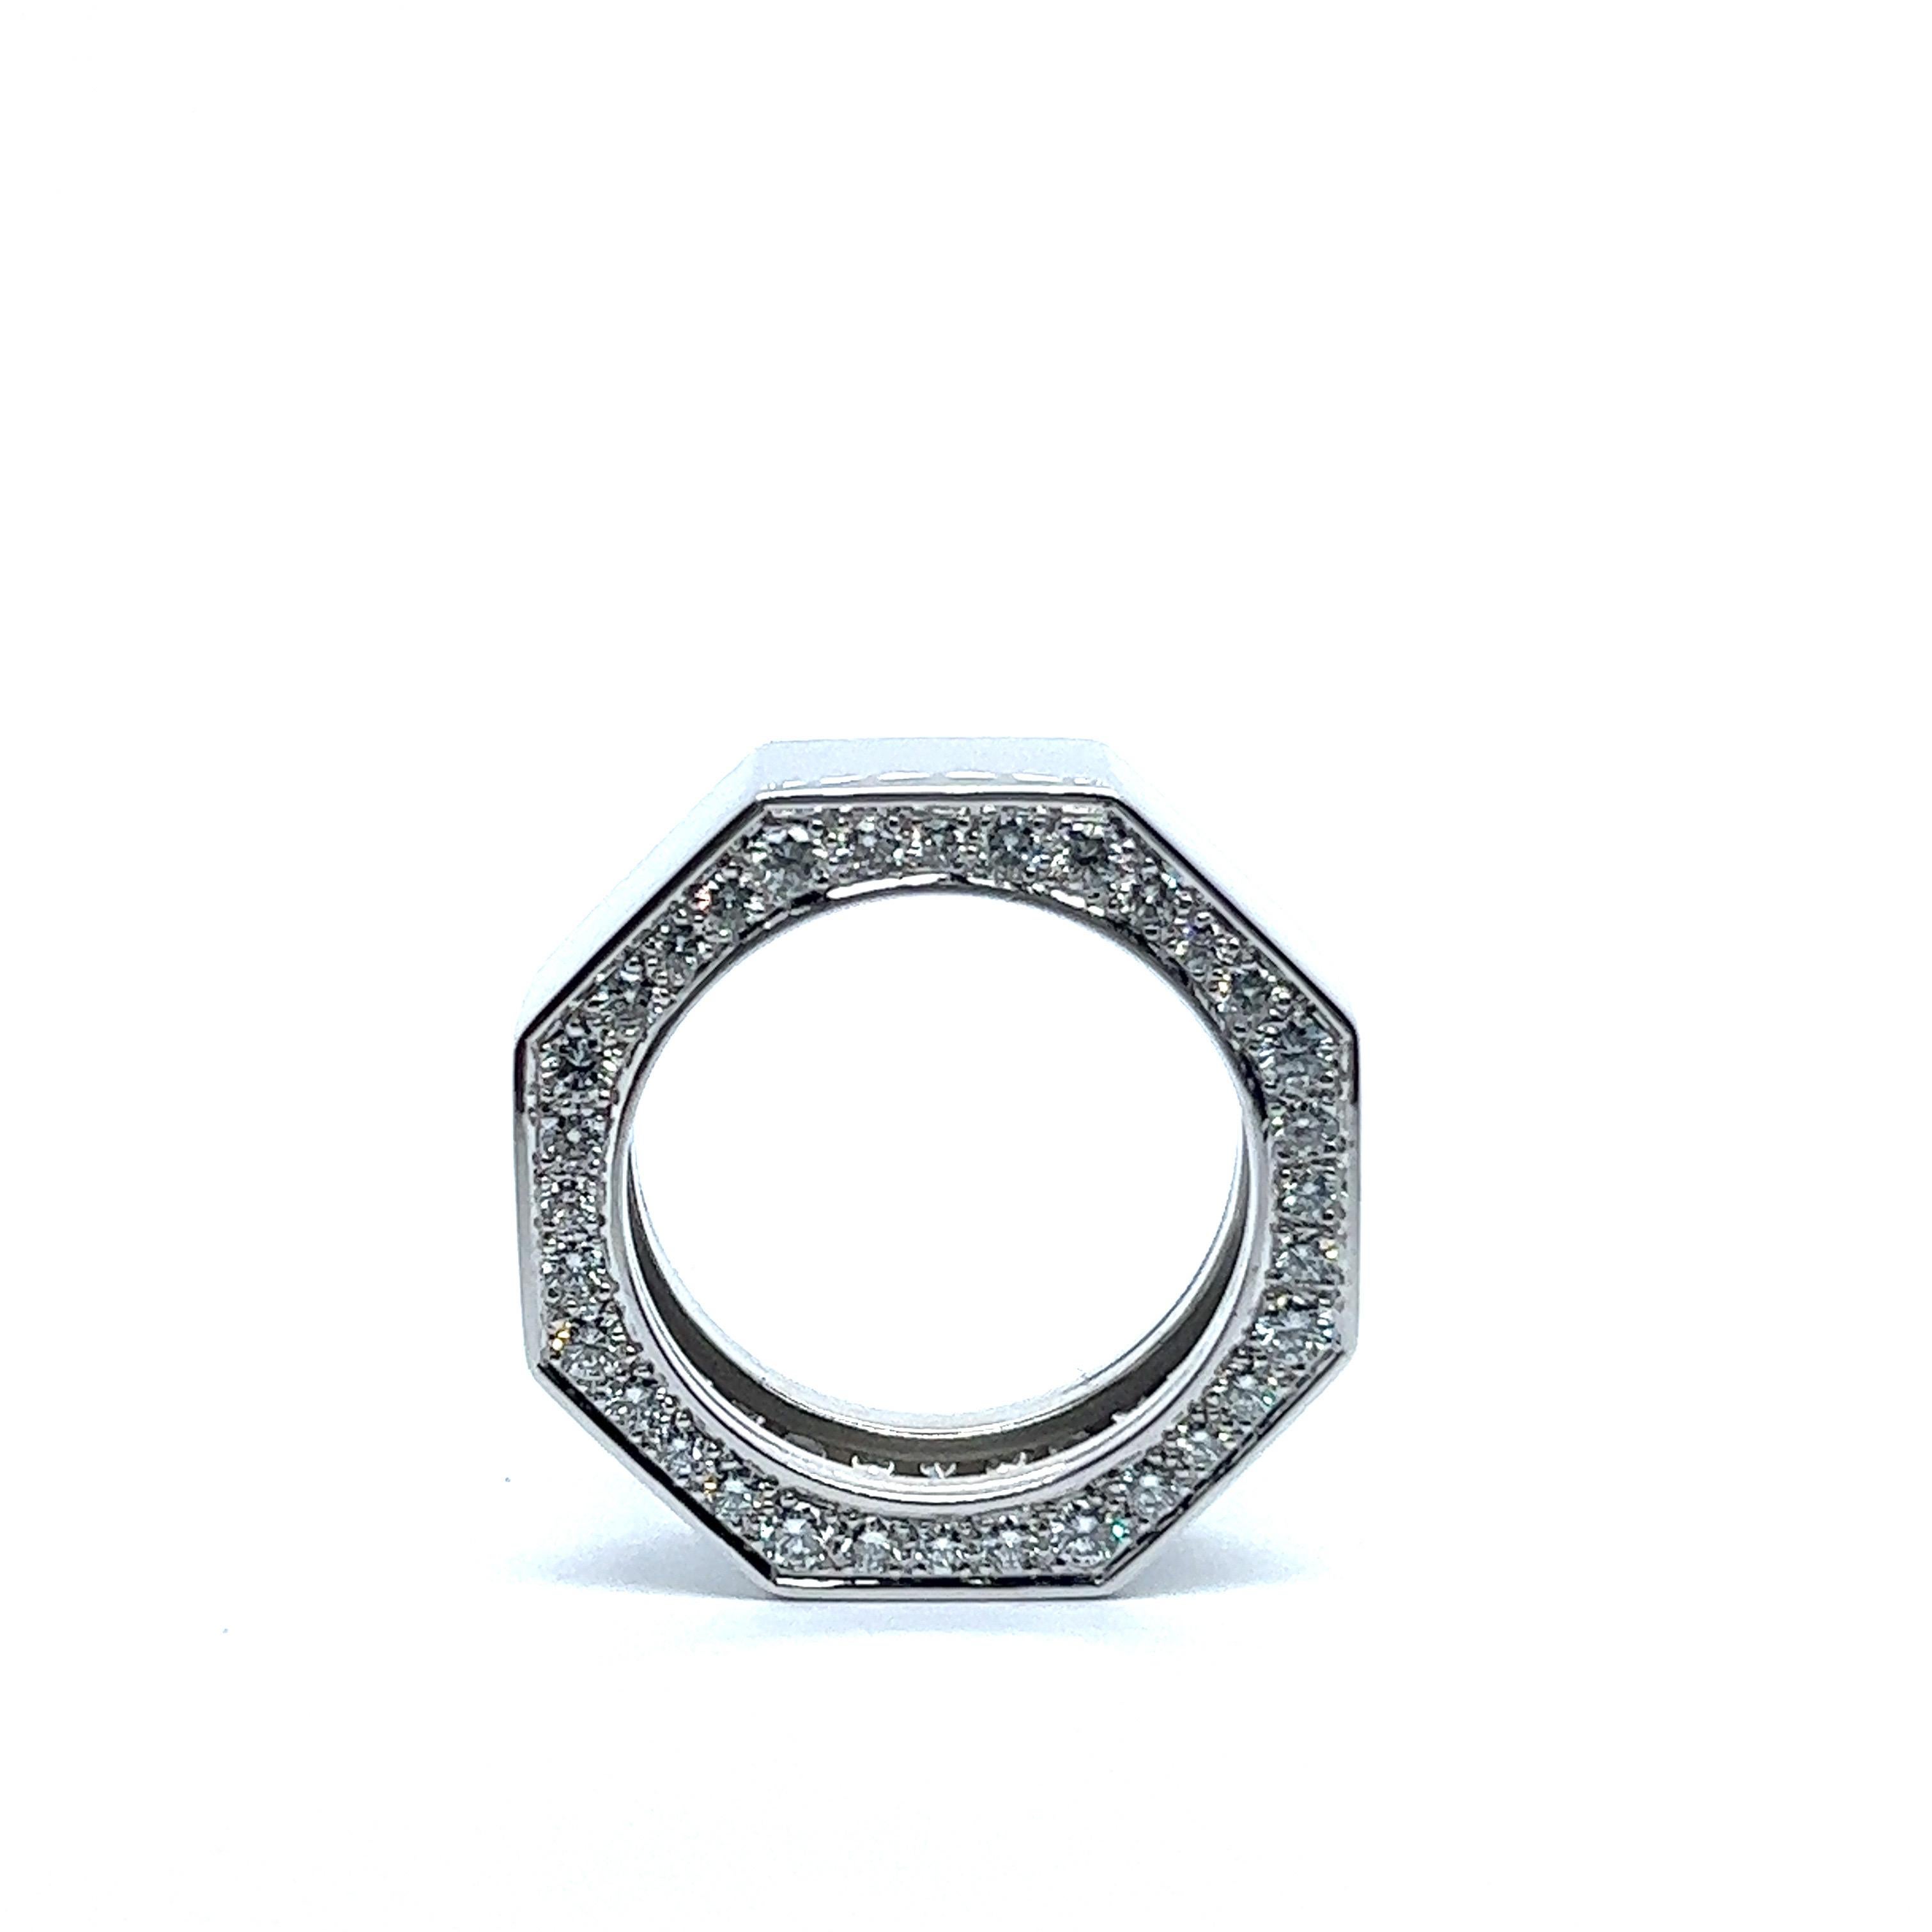 Bold and undeniably fashionable 18 Karat white gold octagonal grafik ring. This show-stopping piece is adorned with a stunning array of 64 brilliant-cut diamonds, boasting a dazzling G-H color and vs-si clarity, totaling an impressive 2.20 carats.